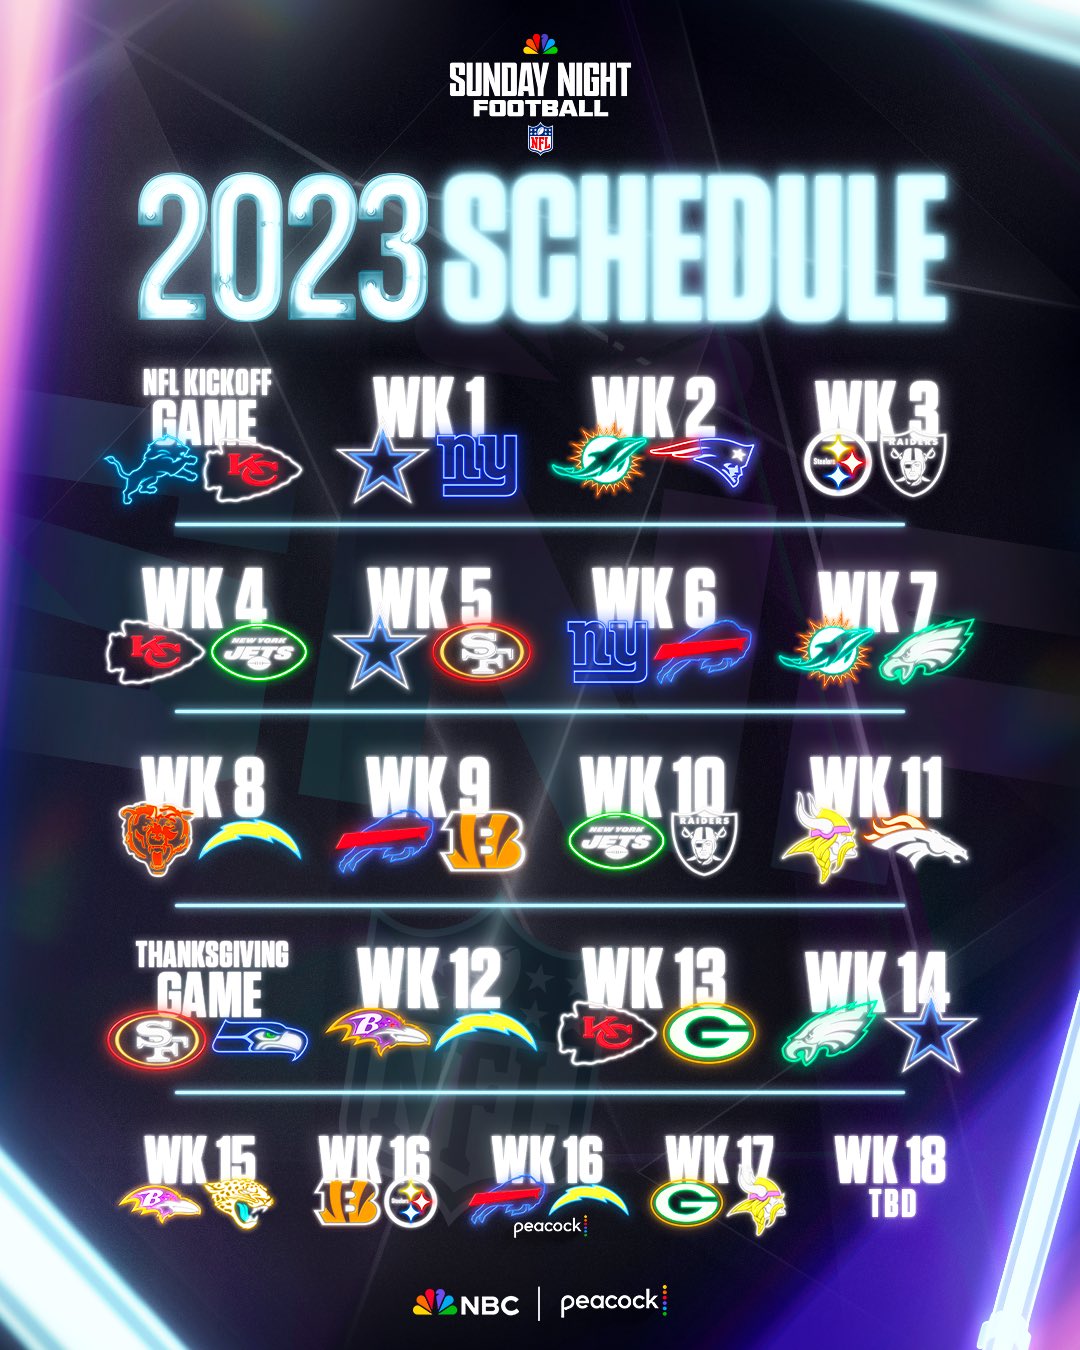 NFL Schedule 2023 - All NFL Games Today!